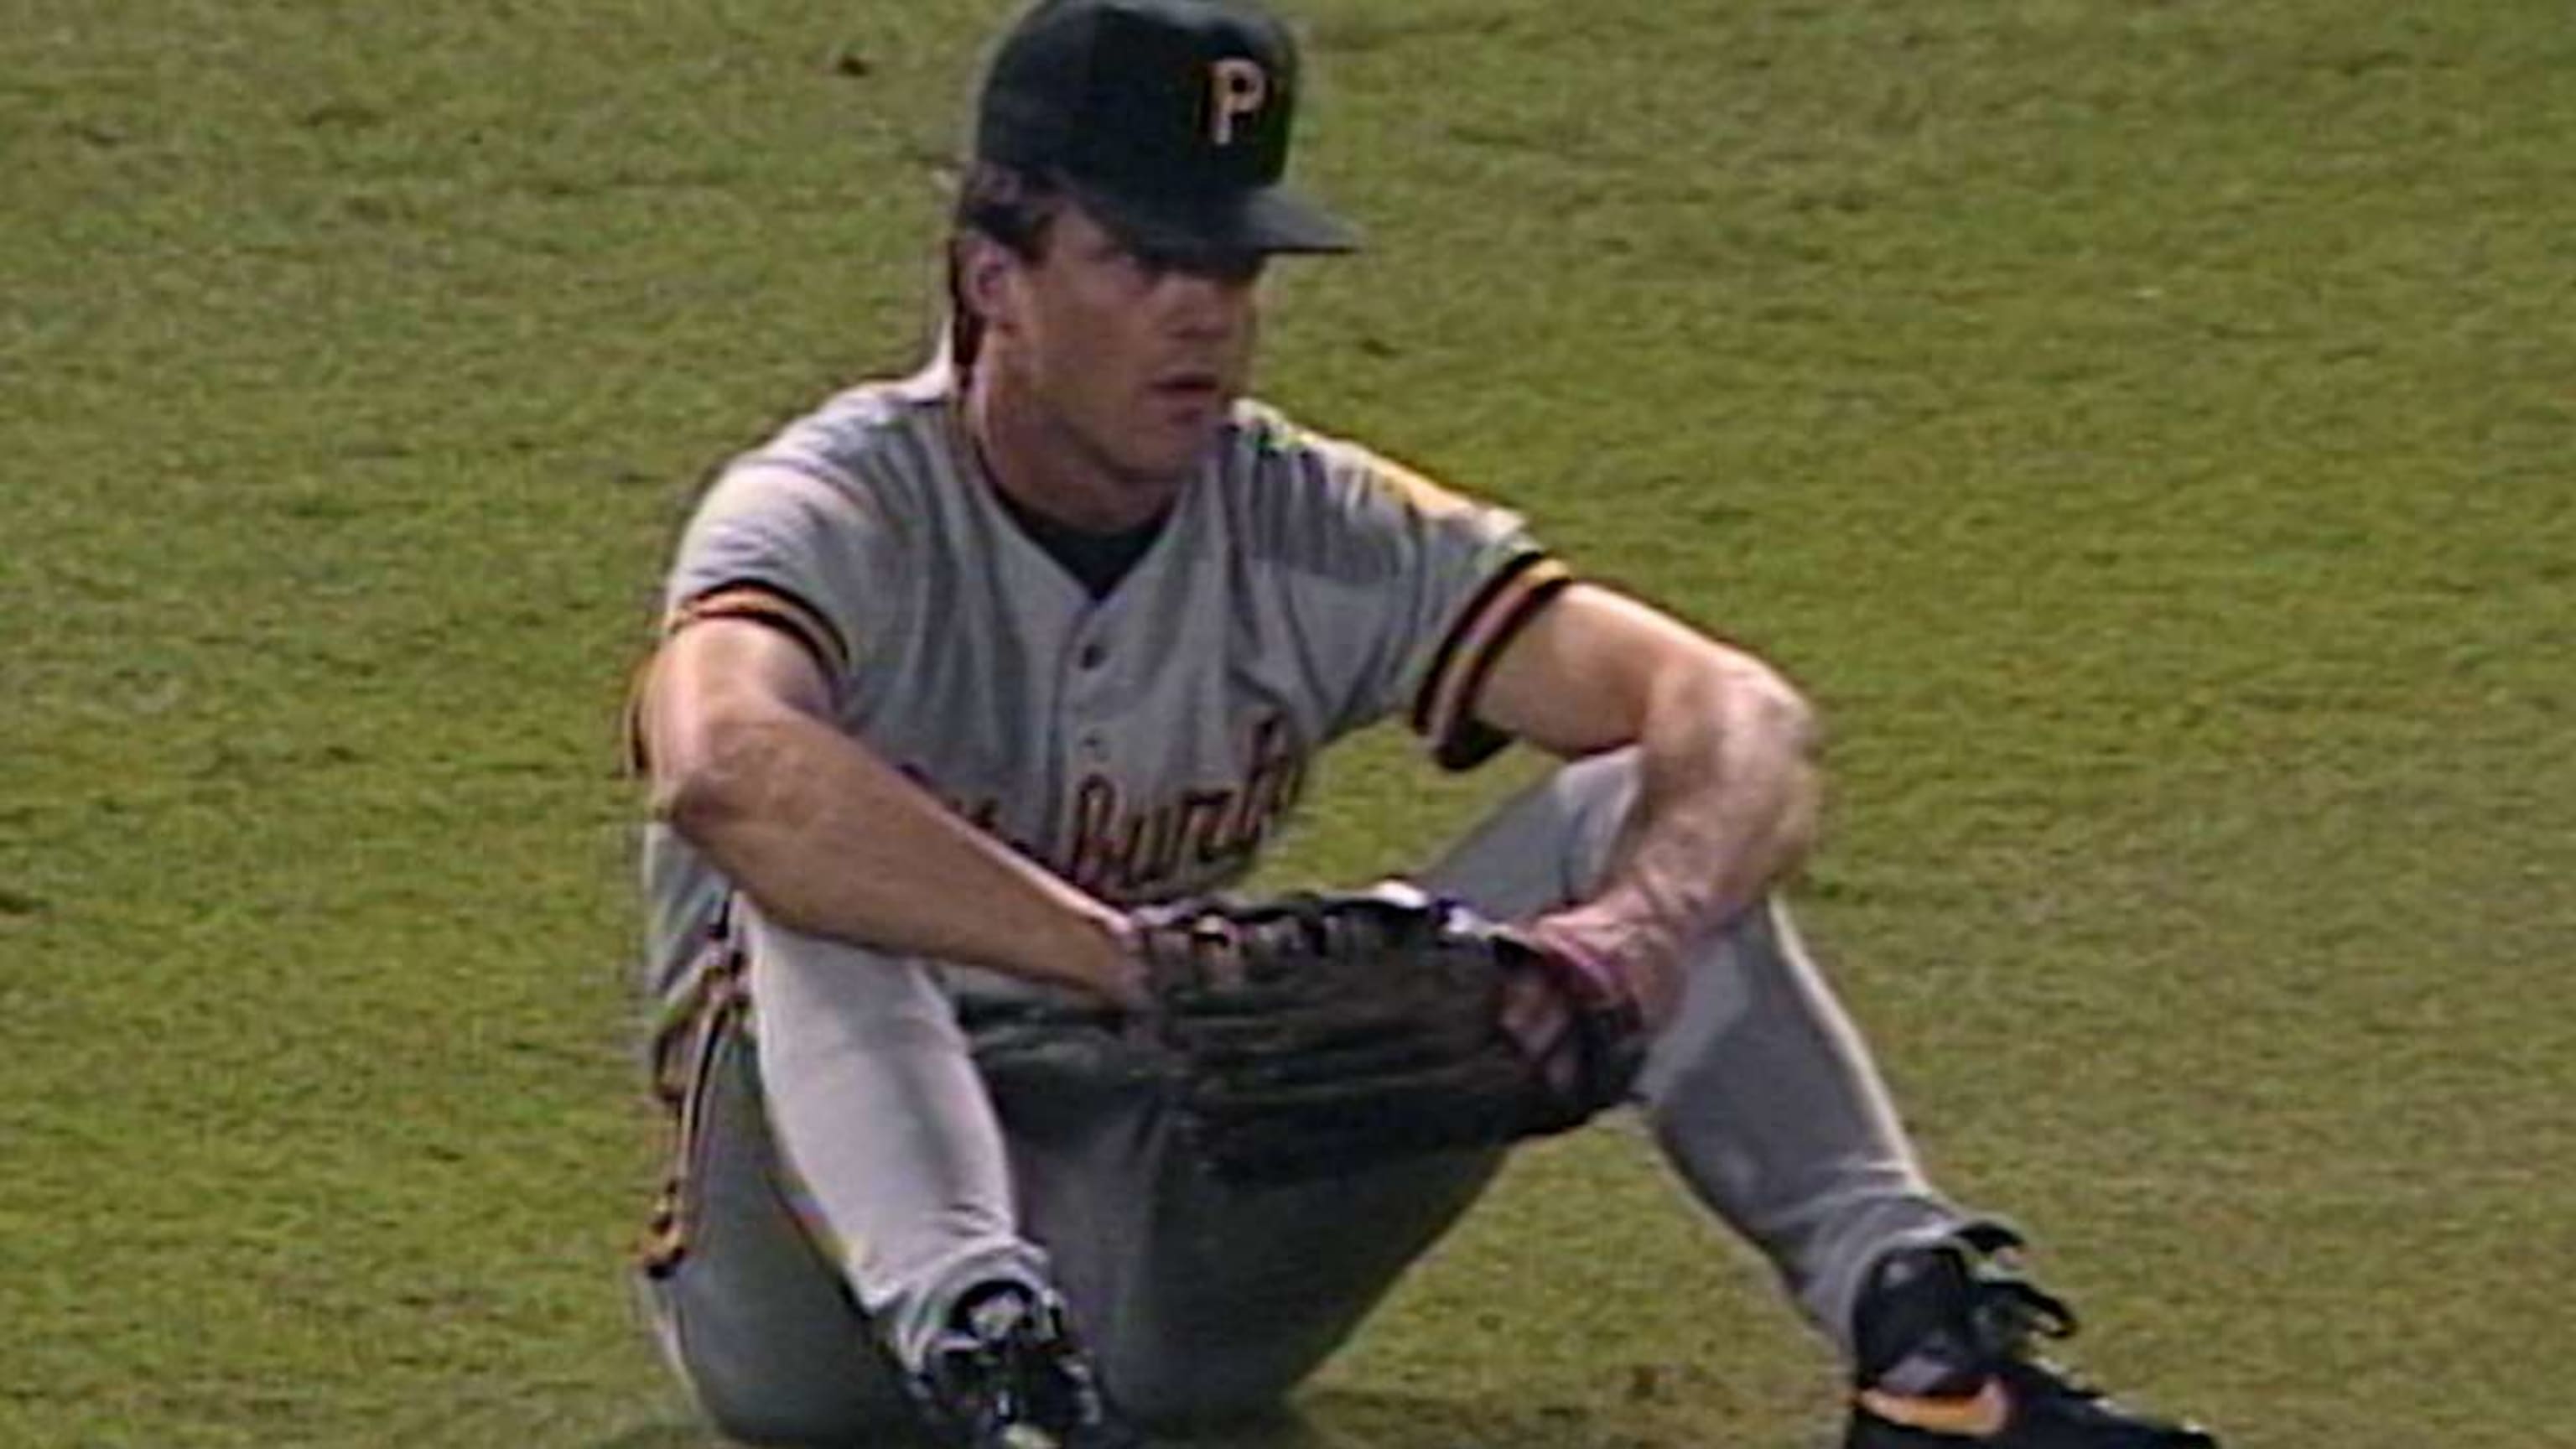 Before Sid slid: All the 'freaky things' that happened in the 9th inning  before Sid Bream's infamous slide in 1992